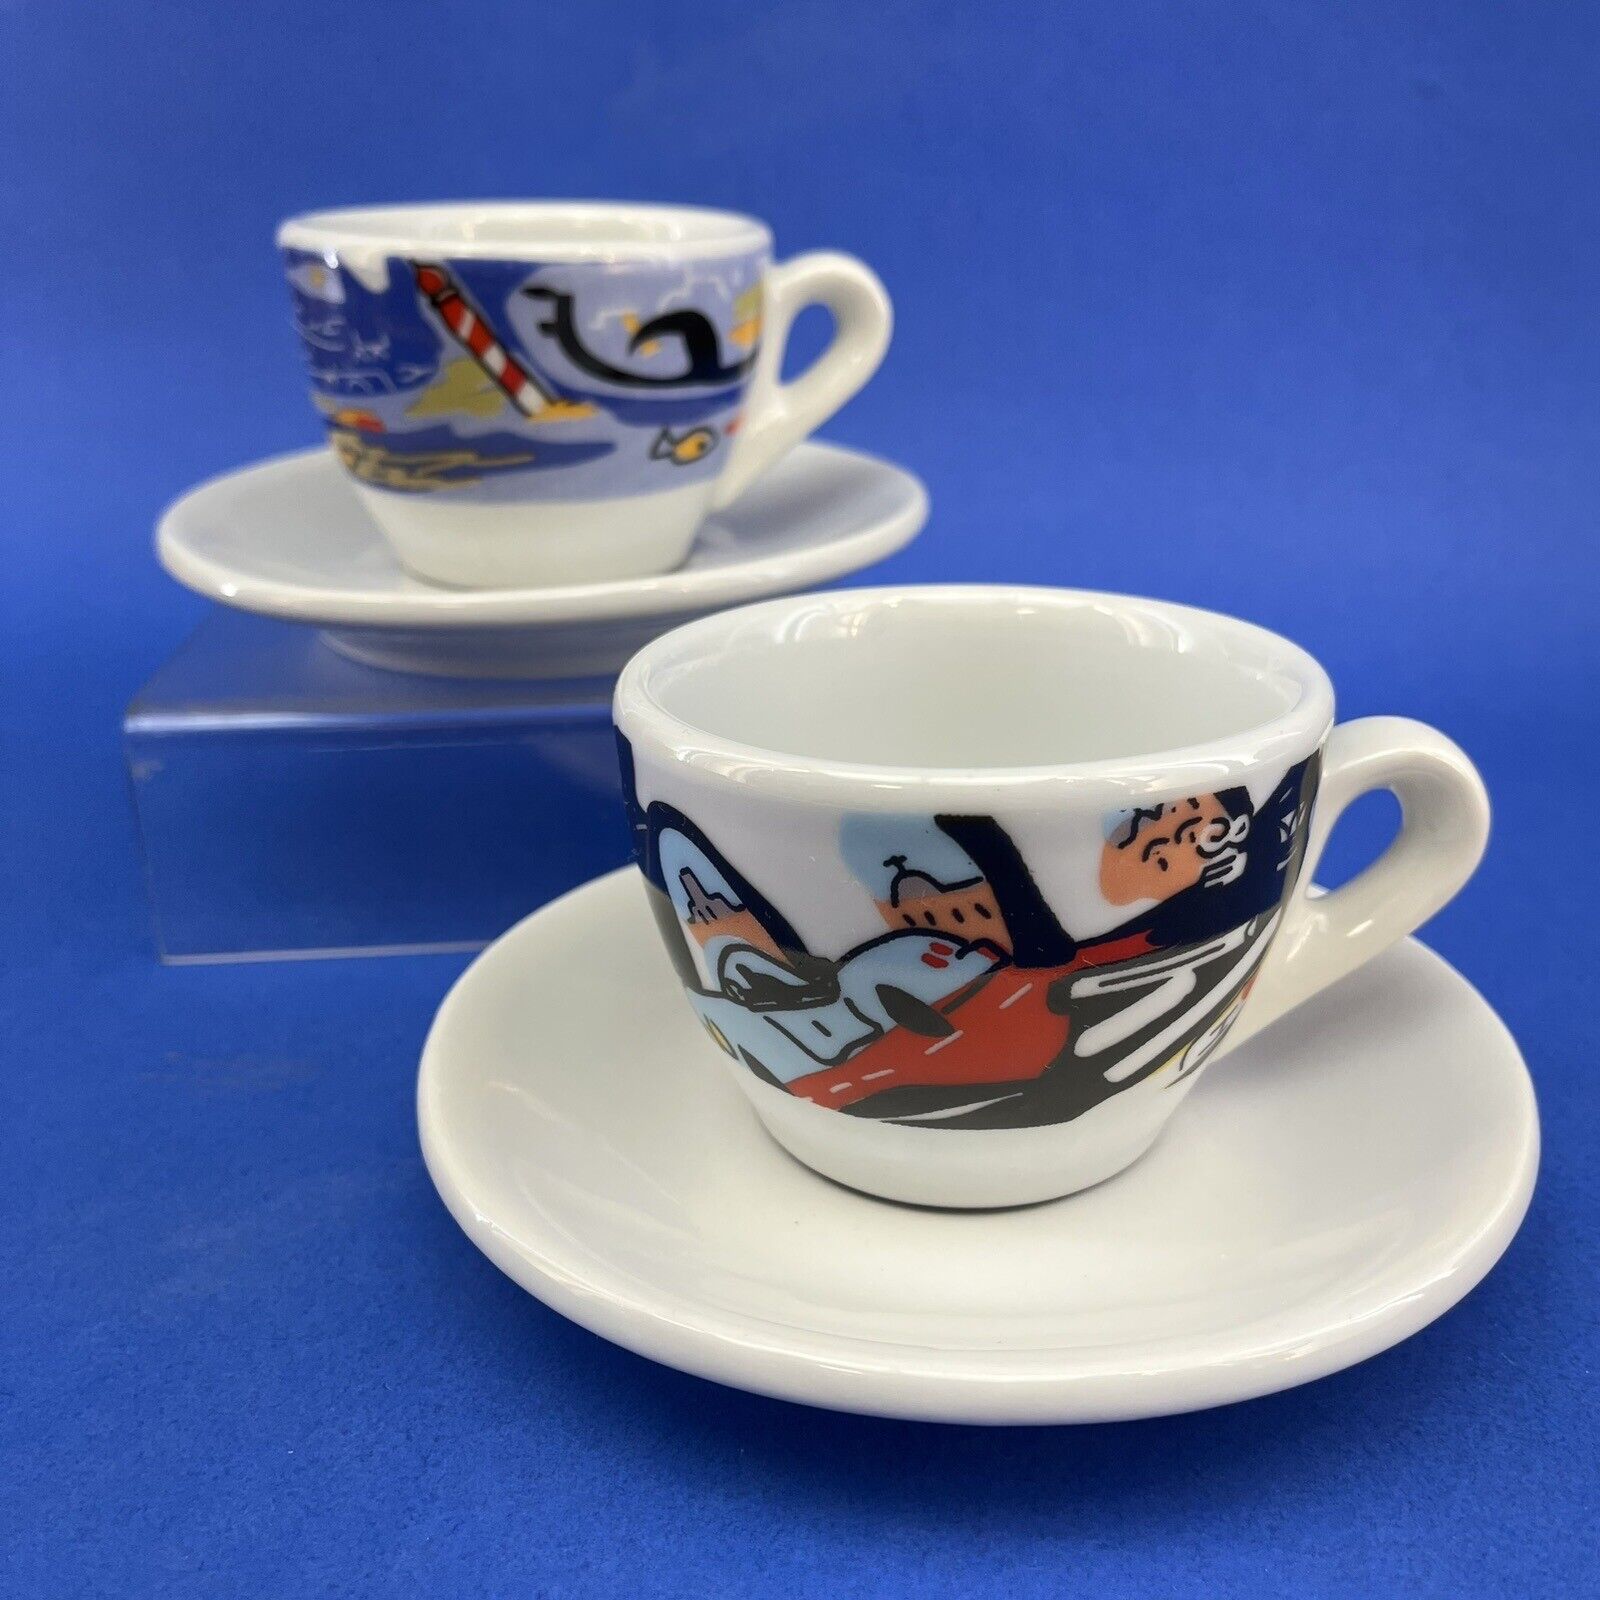 D’ancap Pair Of Venice Rome Porcelain Cappuccino Cup￼ Saucer Italy ￼Coffee